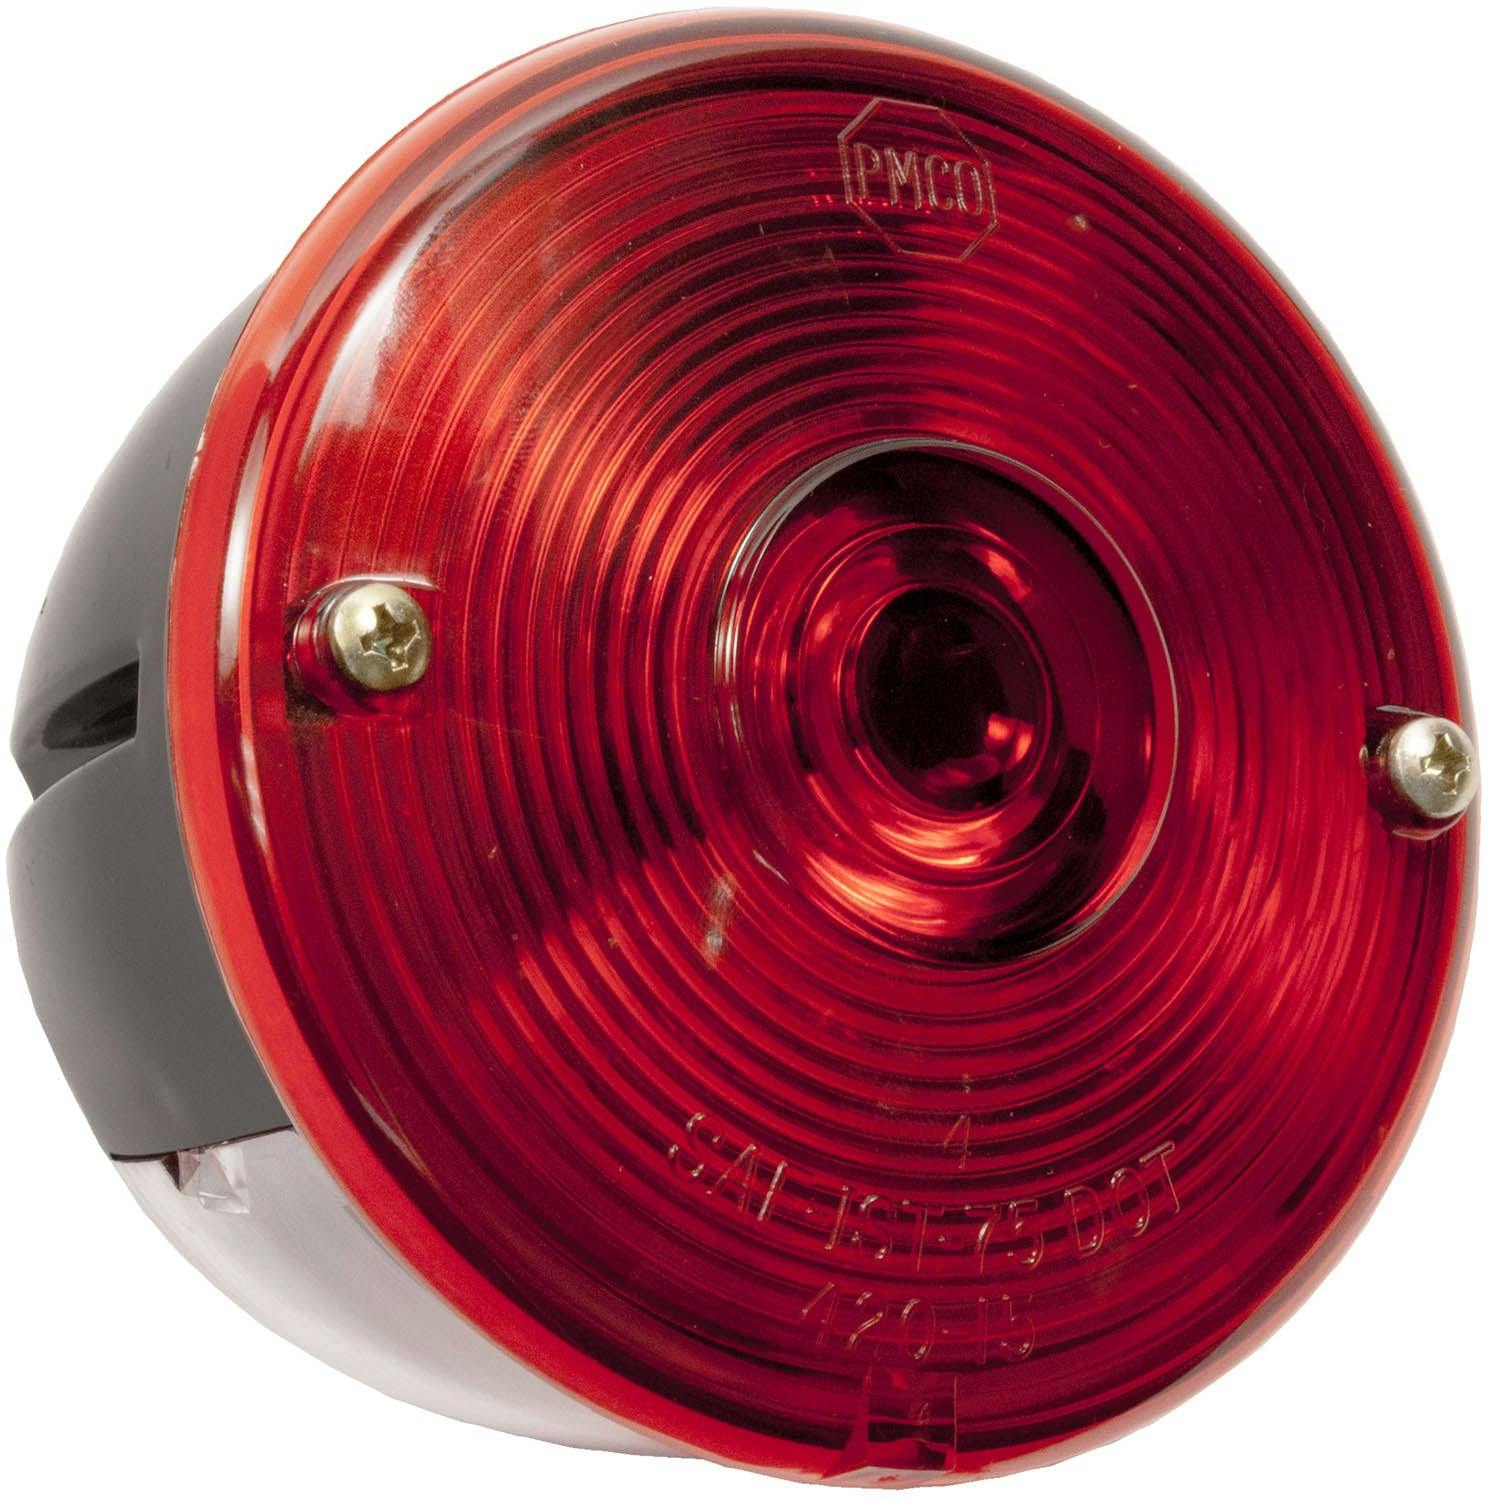 Incandescent Stop/Turn/Tail, Universal, Round, Stud-Mount, w/ License Light, 3.75"X2.625" (Pack of 24)